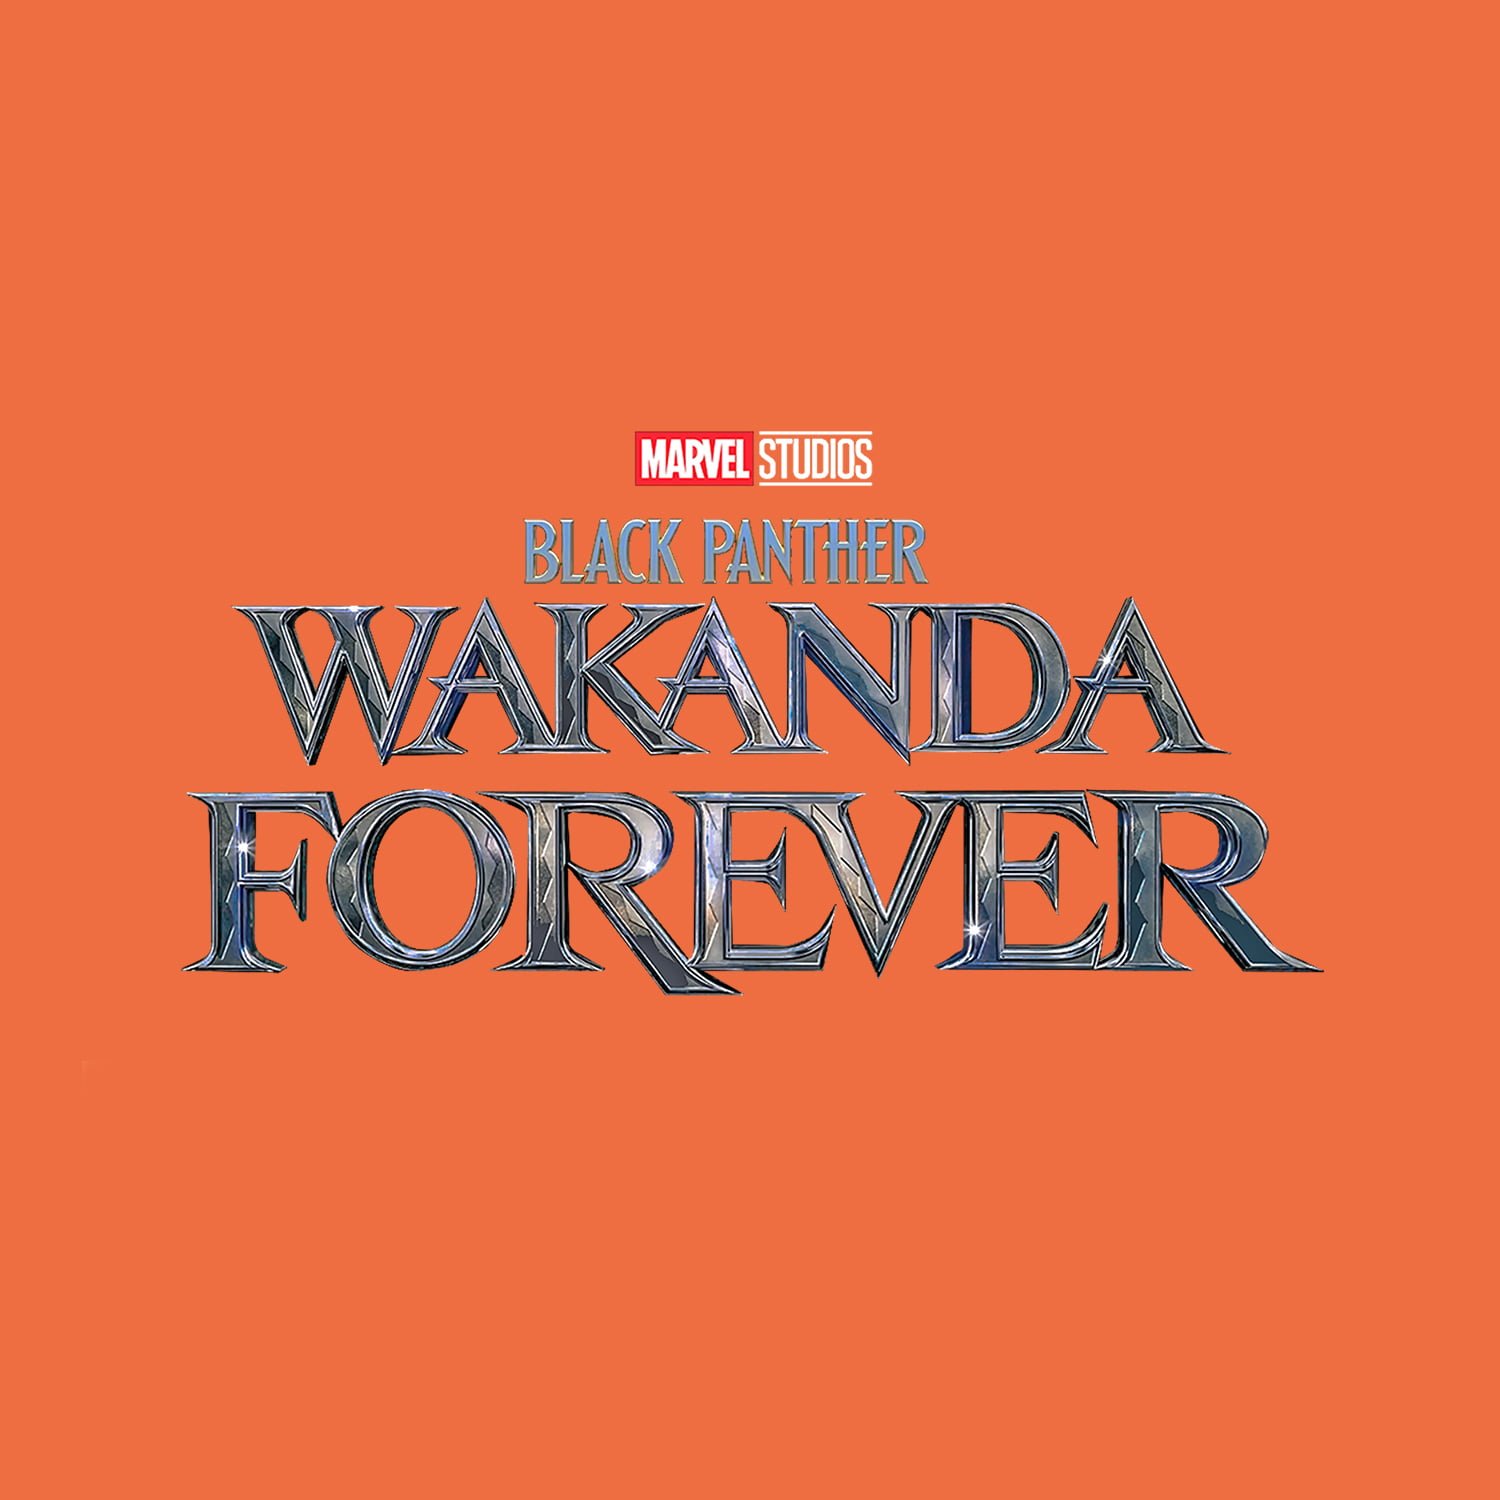 Black Panther: Wakanda Forever' and legacy - The Tufts Daily